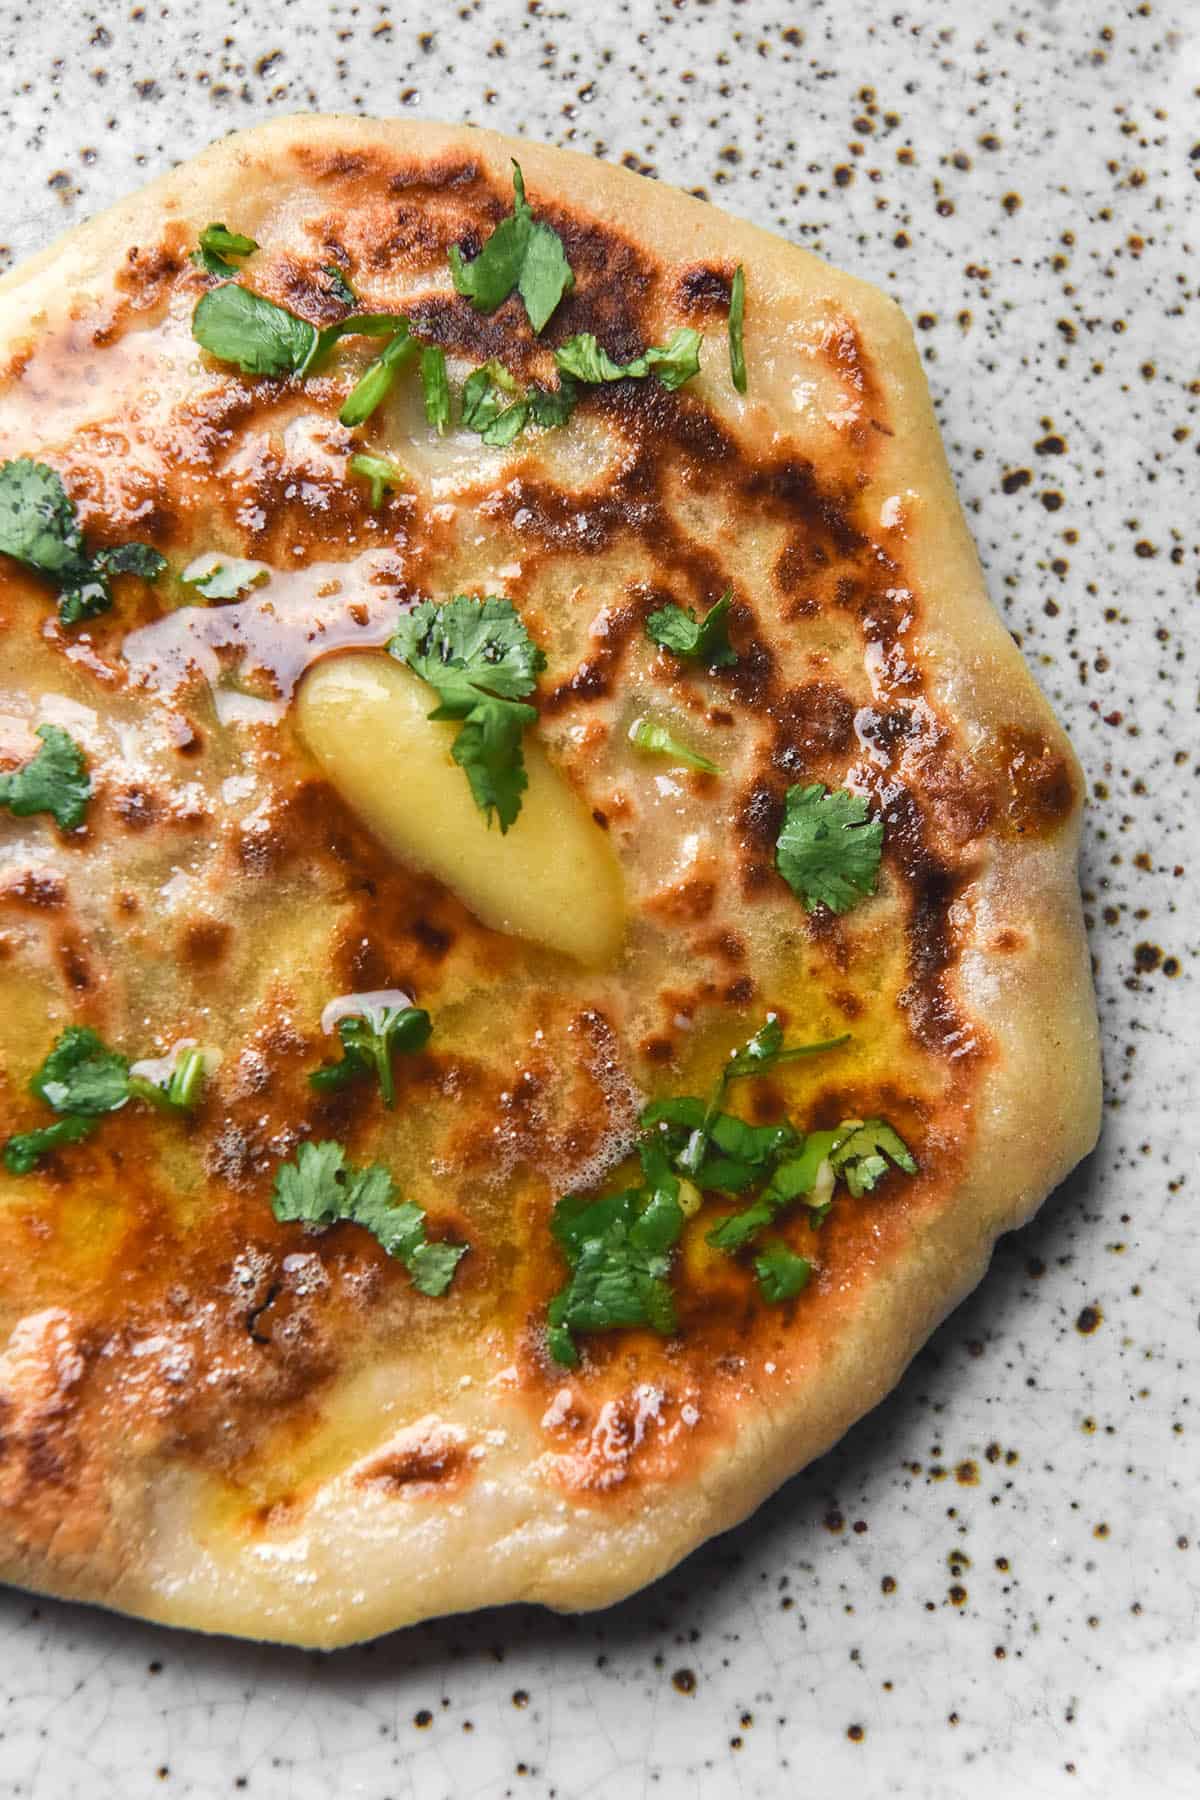 An aerial close up view of a gluten free cheesy naan atop a white speckled ceramic plate. The naan is topped with melting garlic infused ghee and chopped coriander.